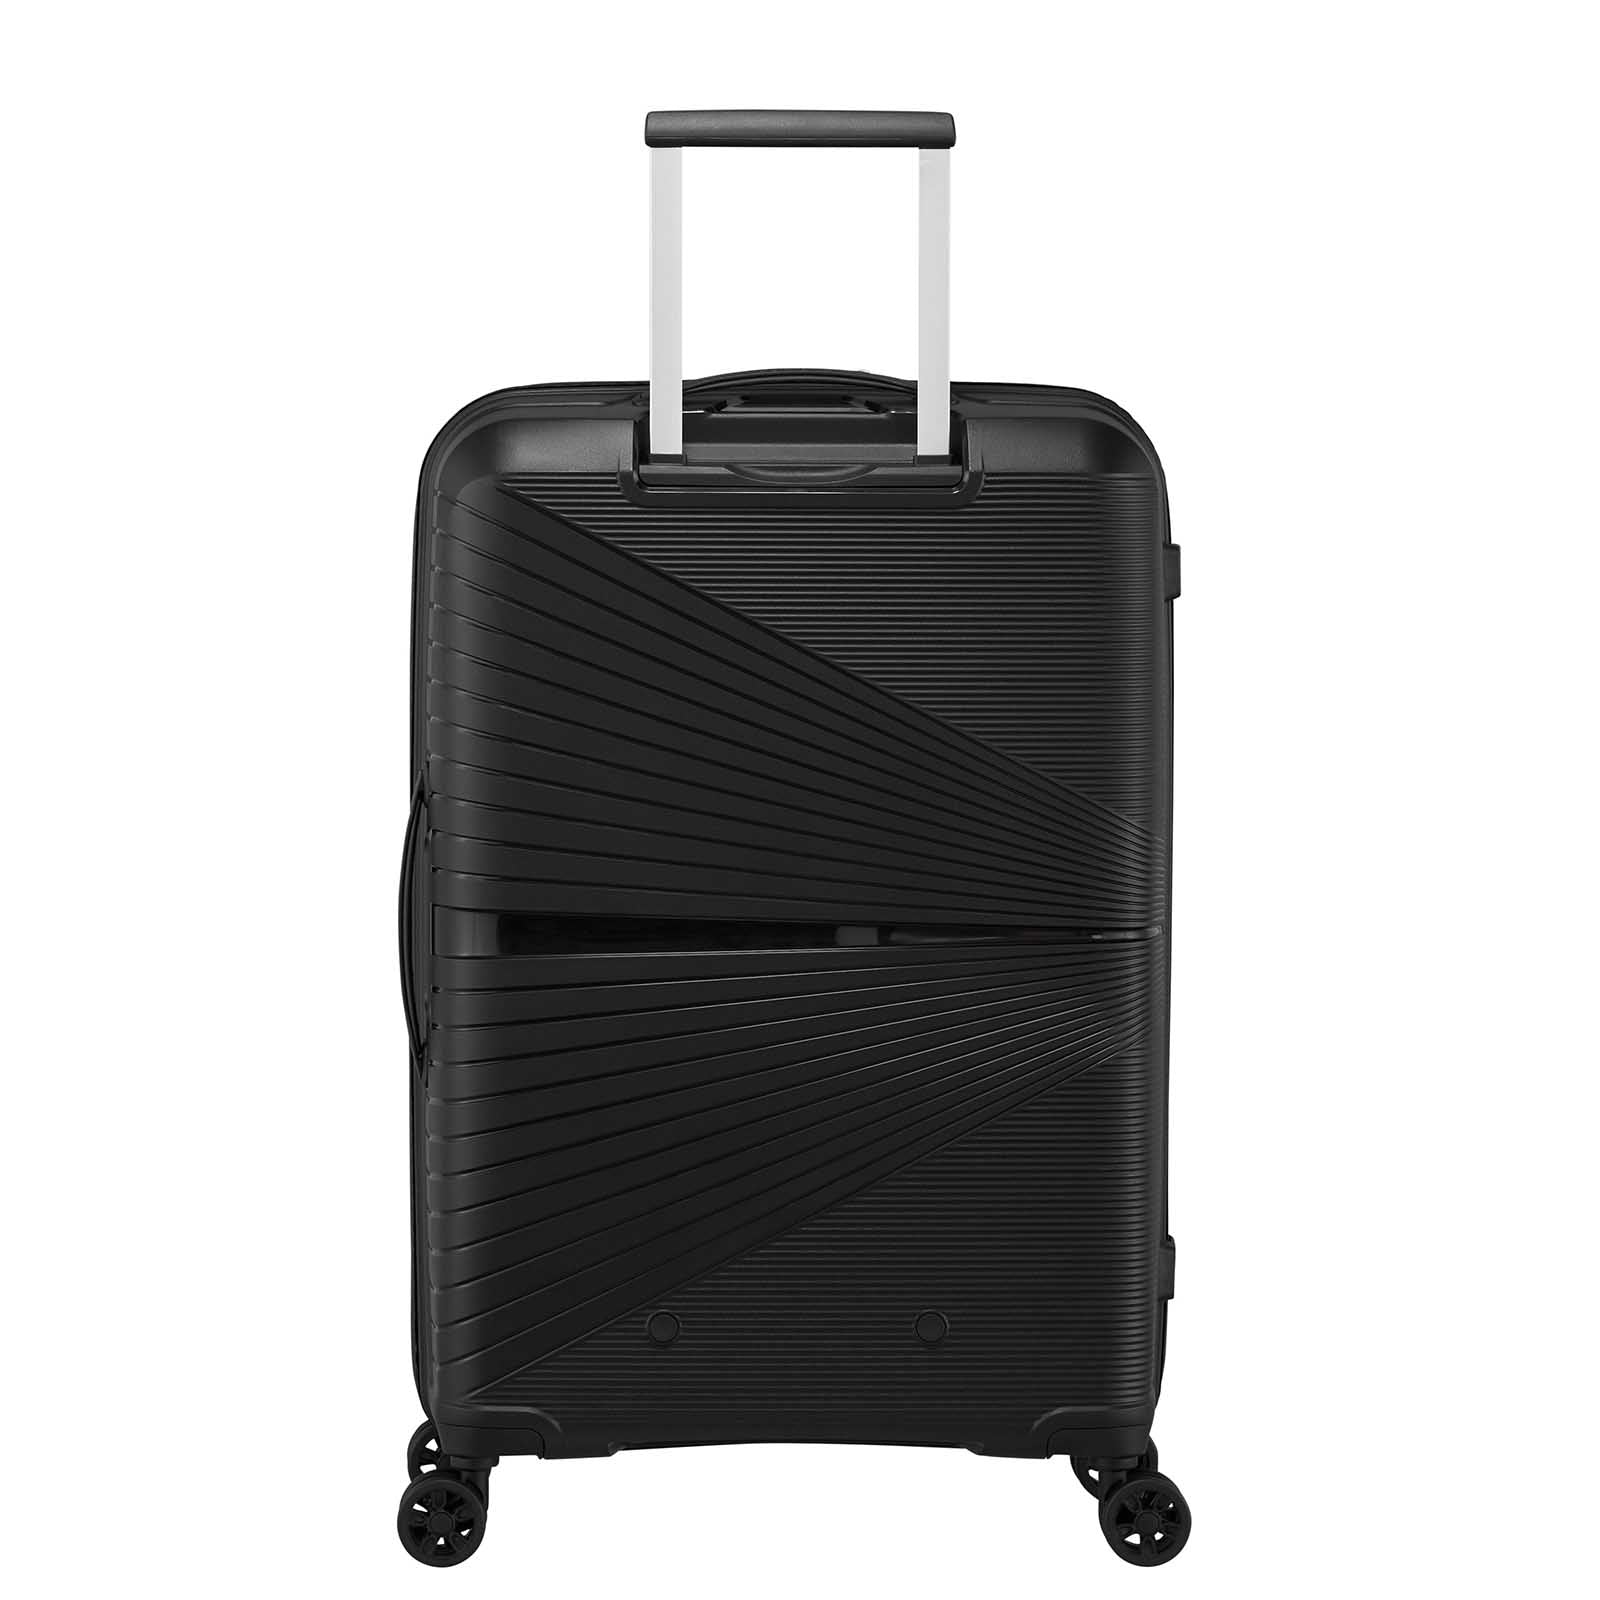 American-Tourister-Airconic-67cm-Suitcase-Onyx-Black-Back